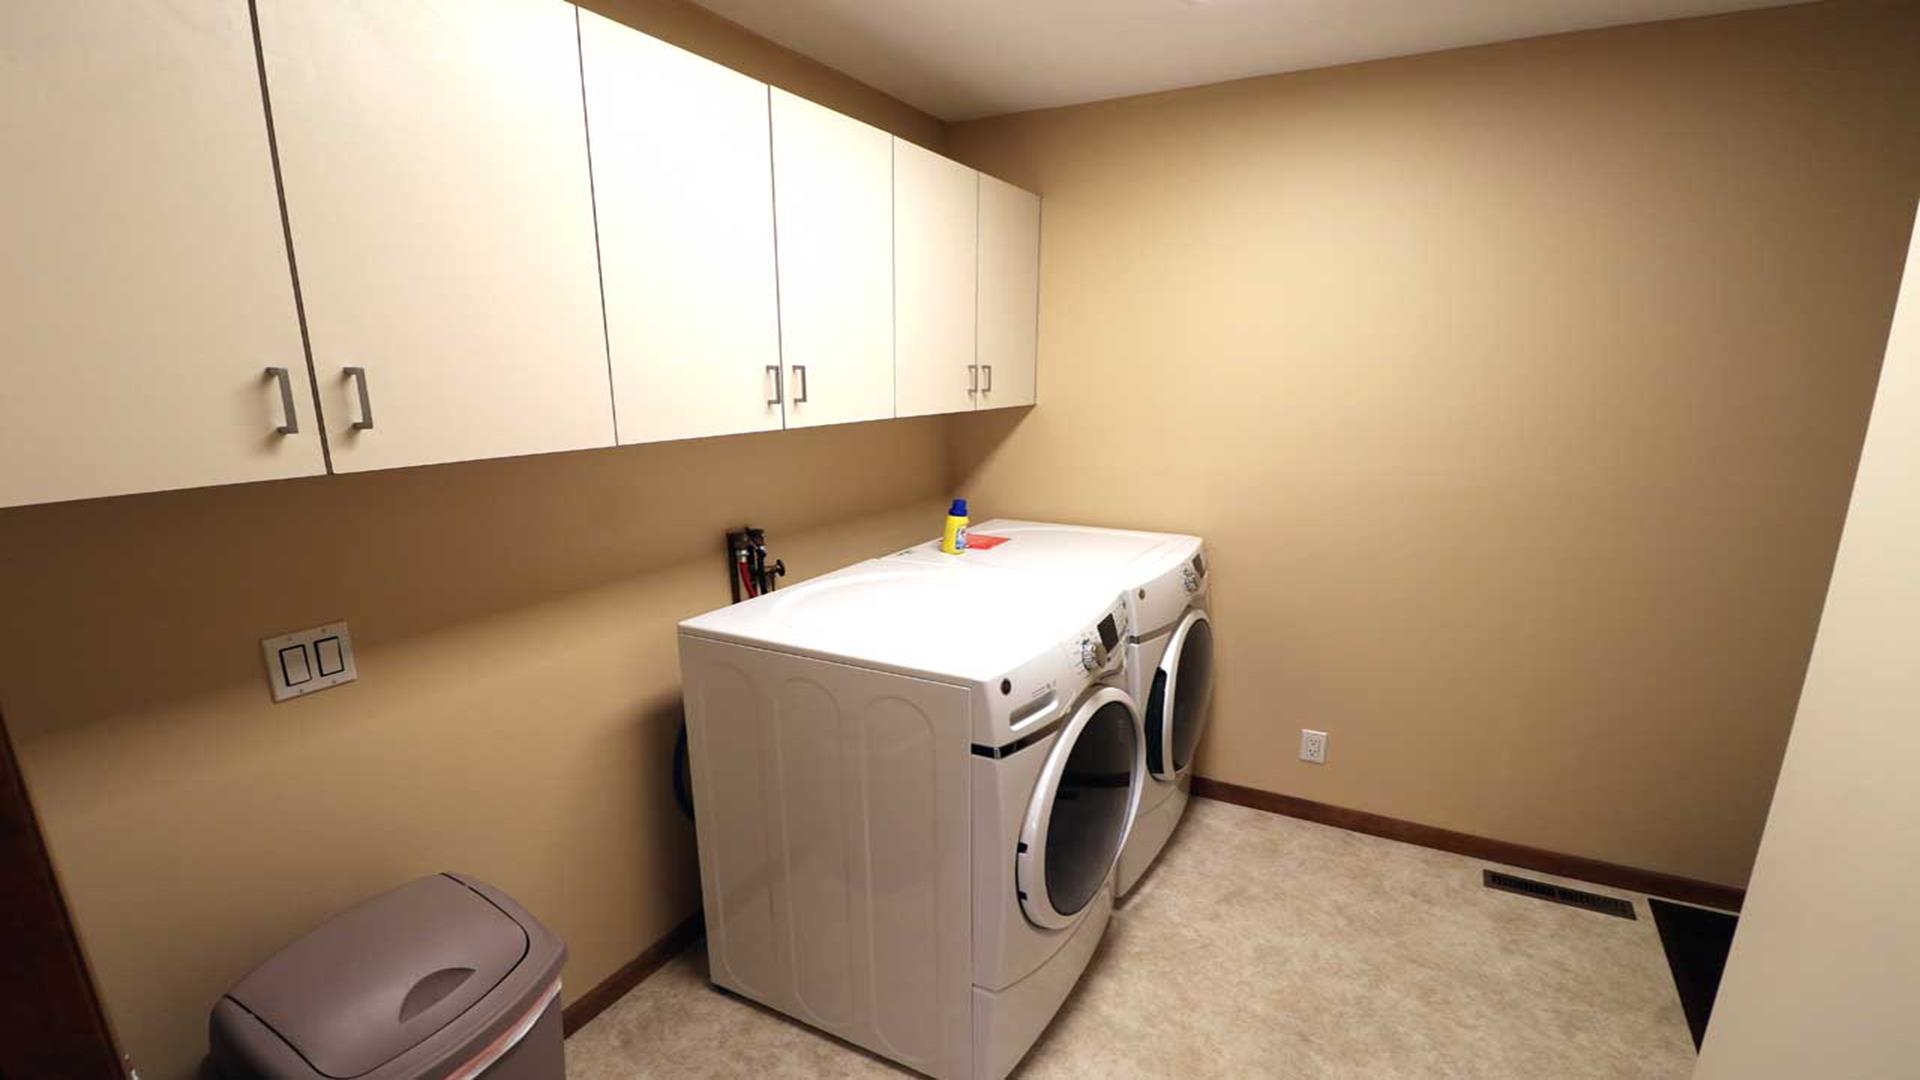 Laundry room between two car garage and kitchen